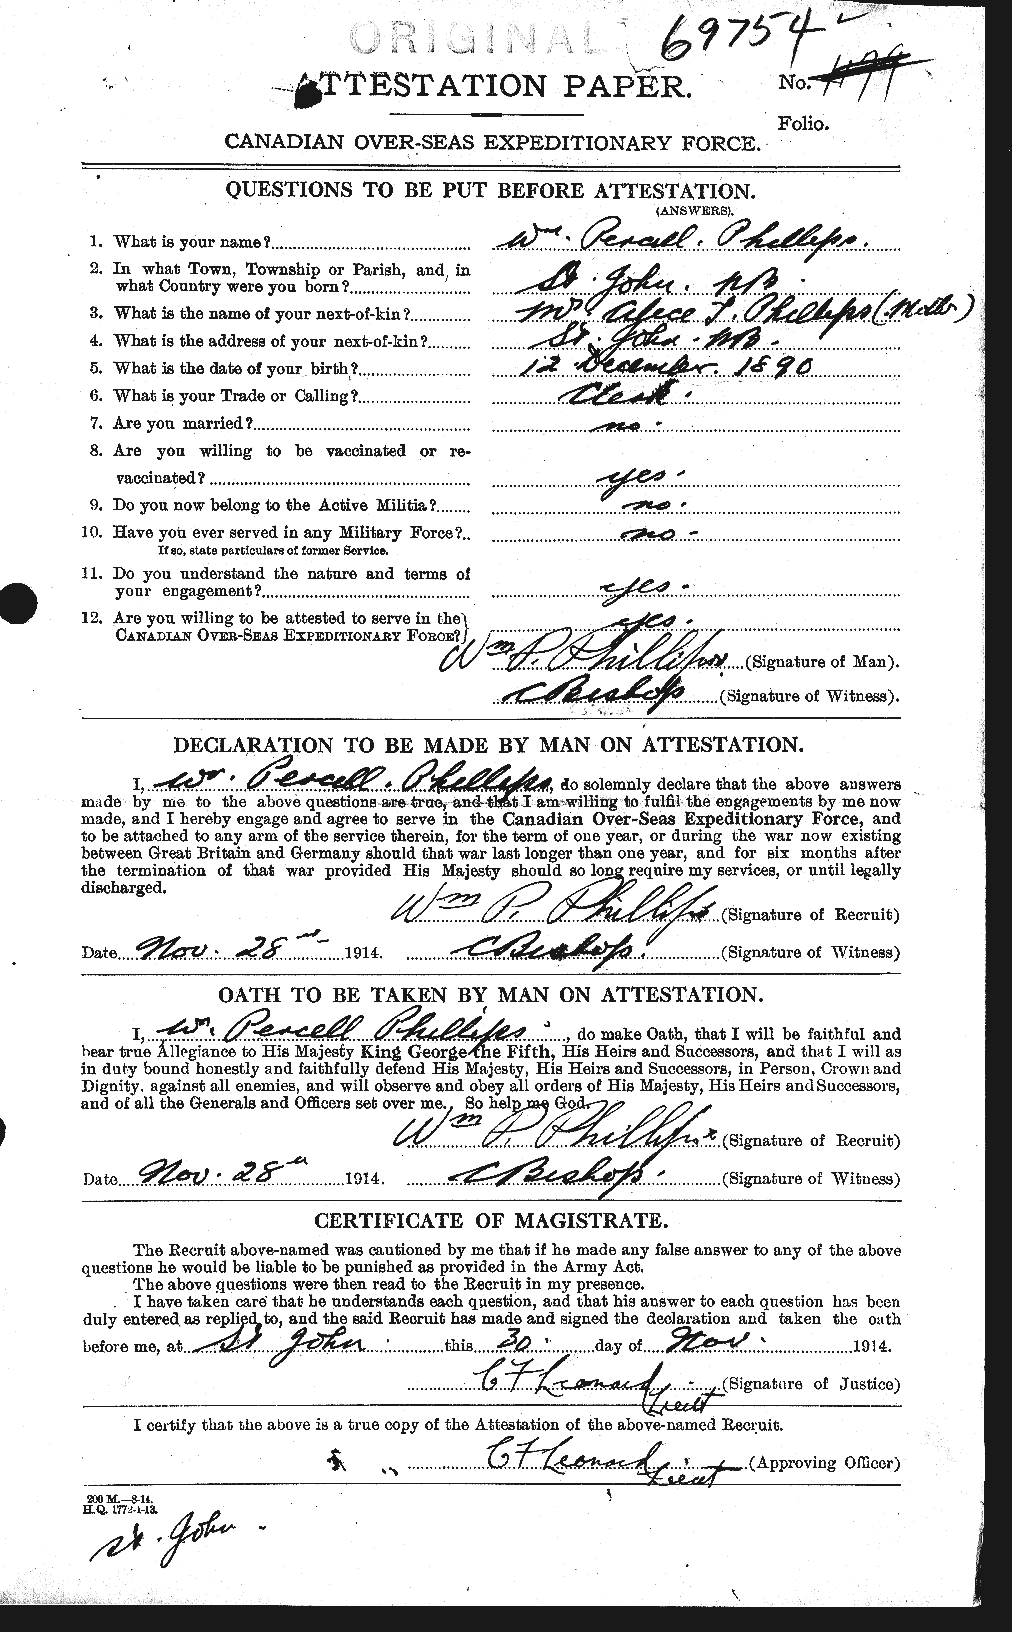 Personnel Records of the First World War - CEF 577992a